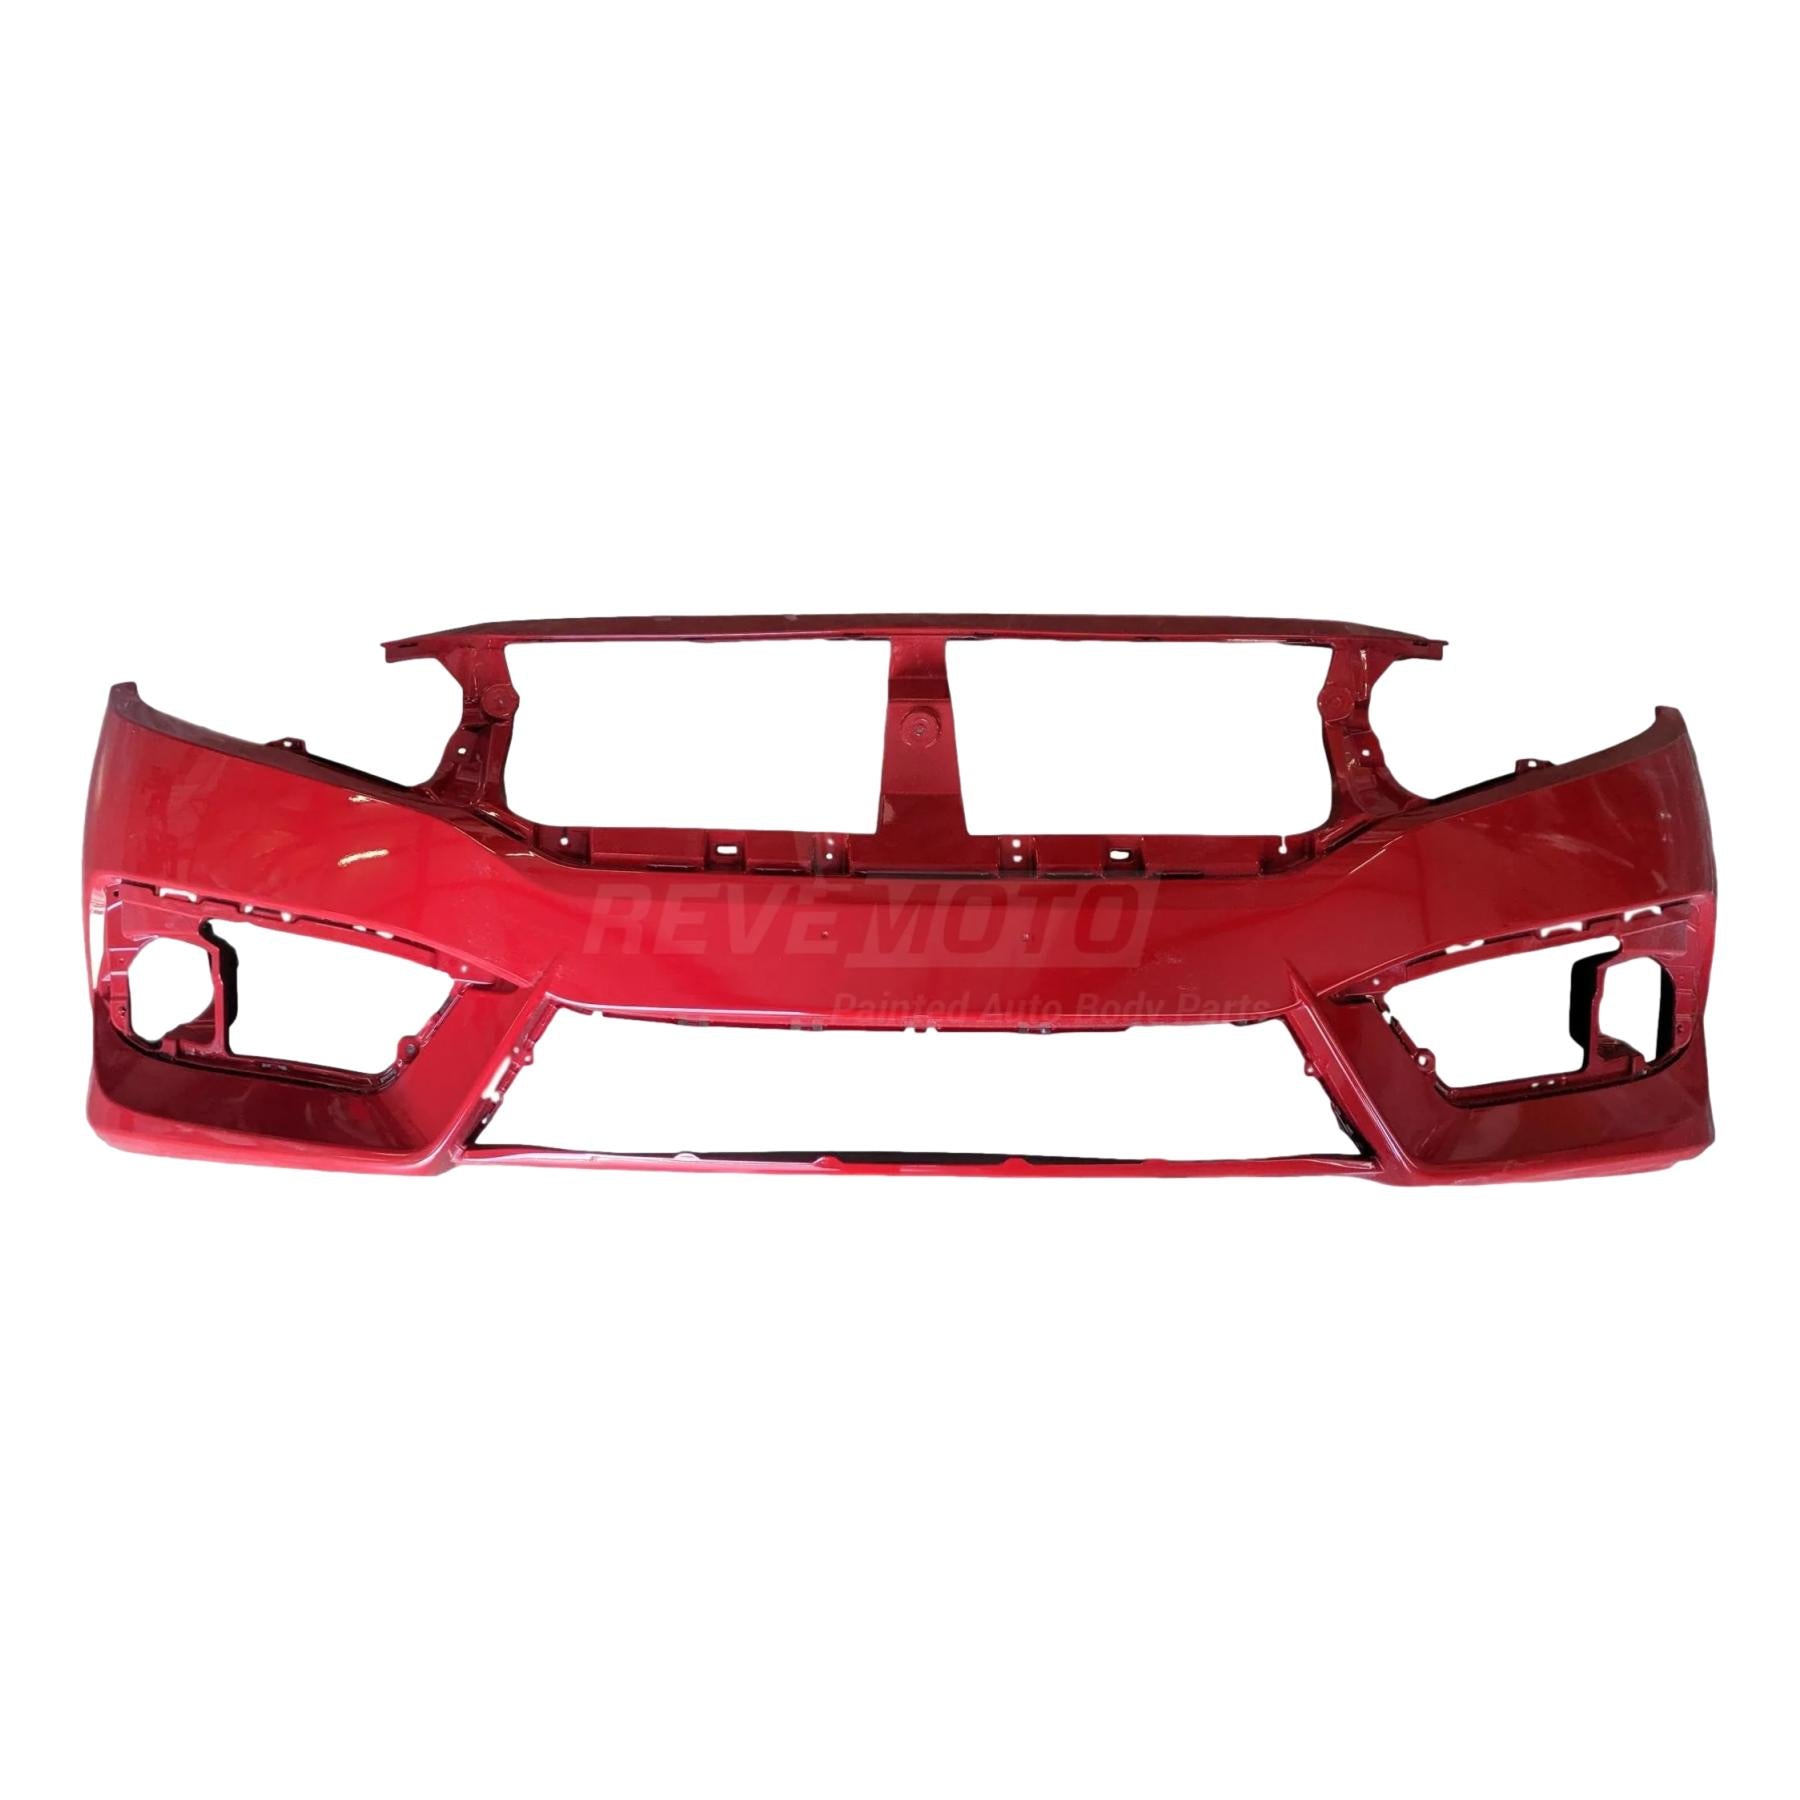 2016-2019 Honda Civic Front Bumper Painted_Coupe/Sedan (Except: SI & Hatchback Models)_Rallye Red (R513)_04711TBAA00ZZ